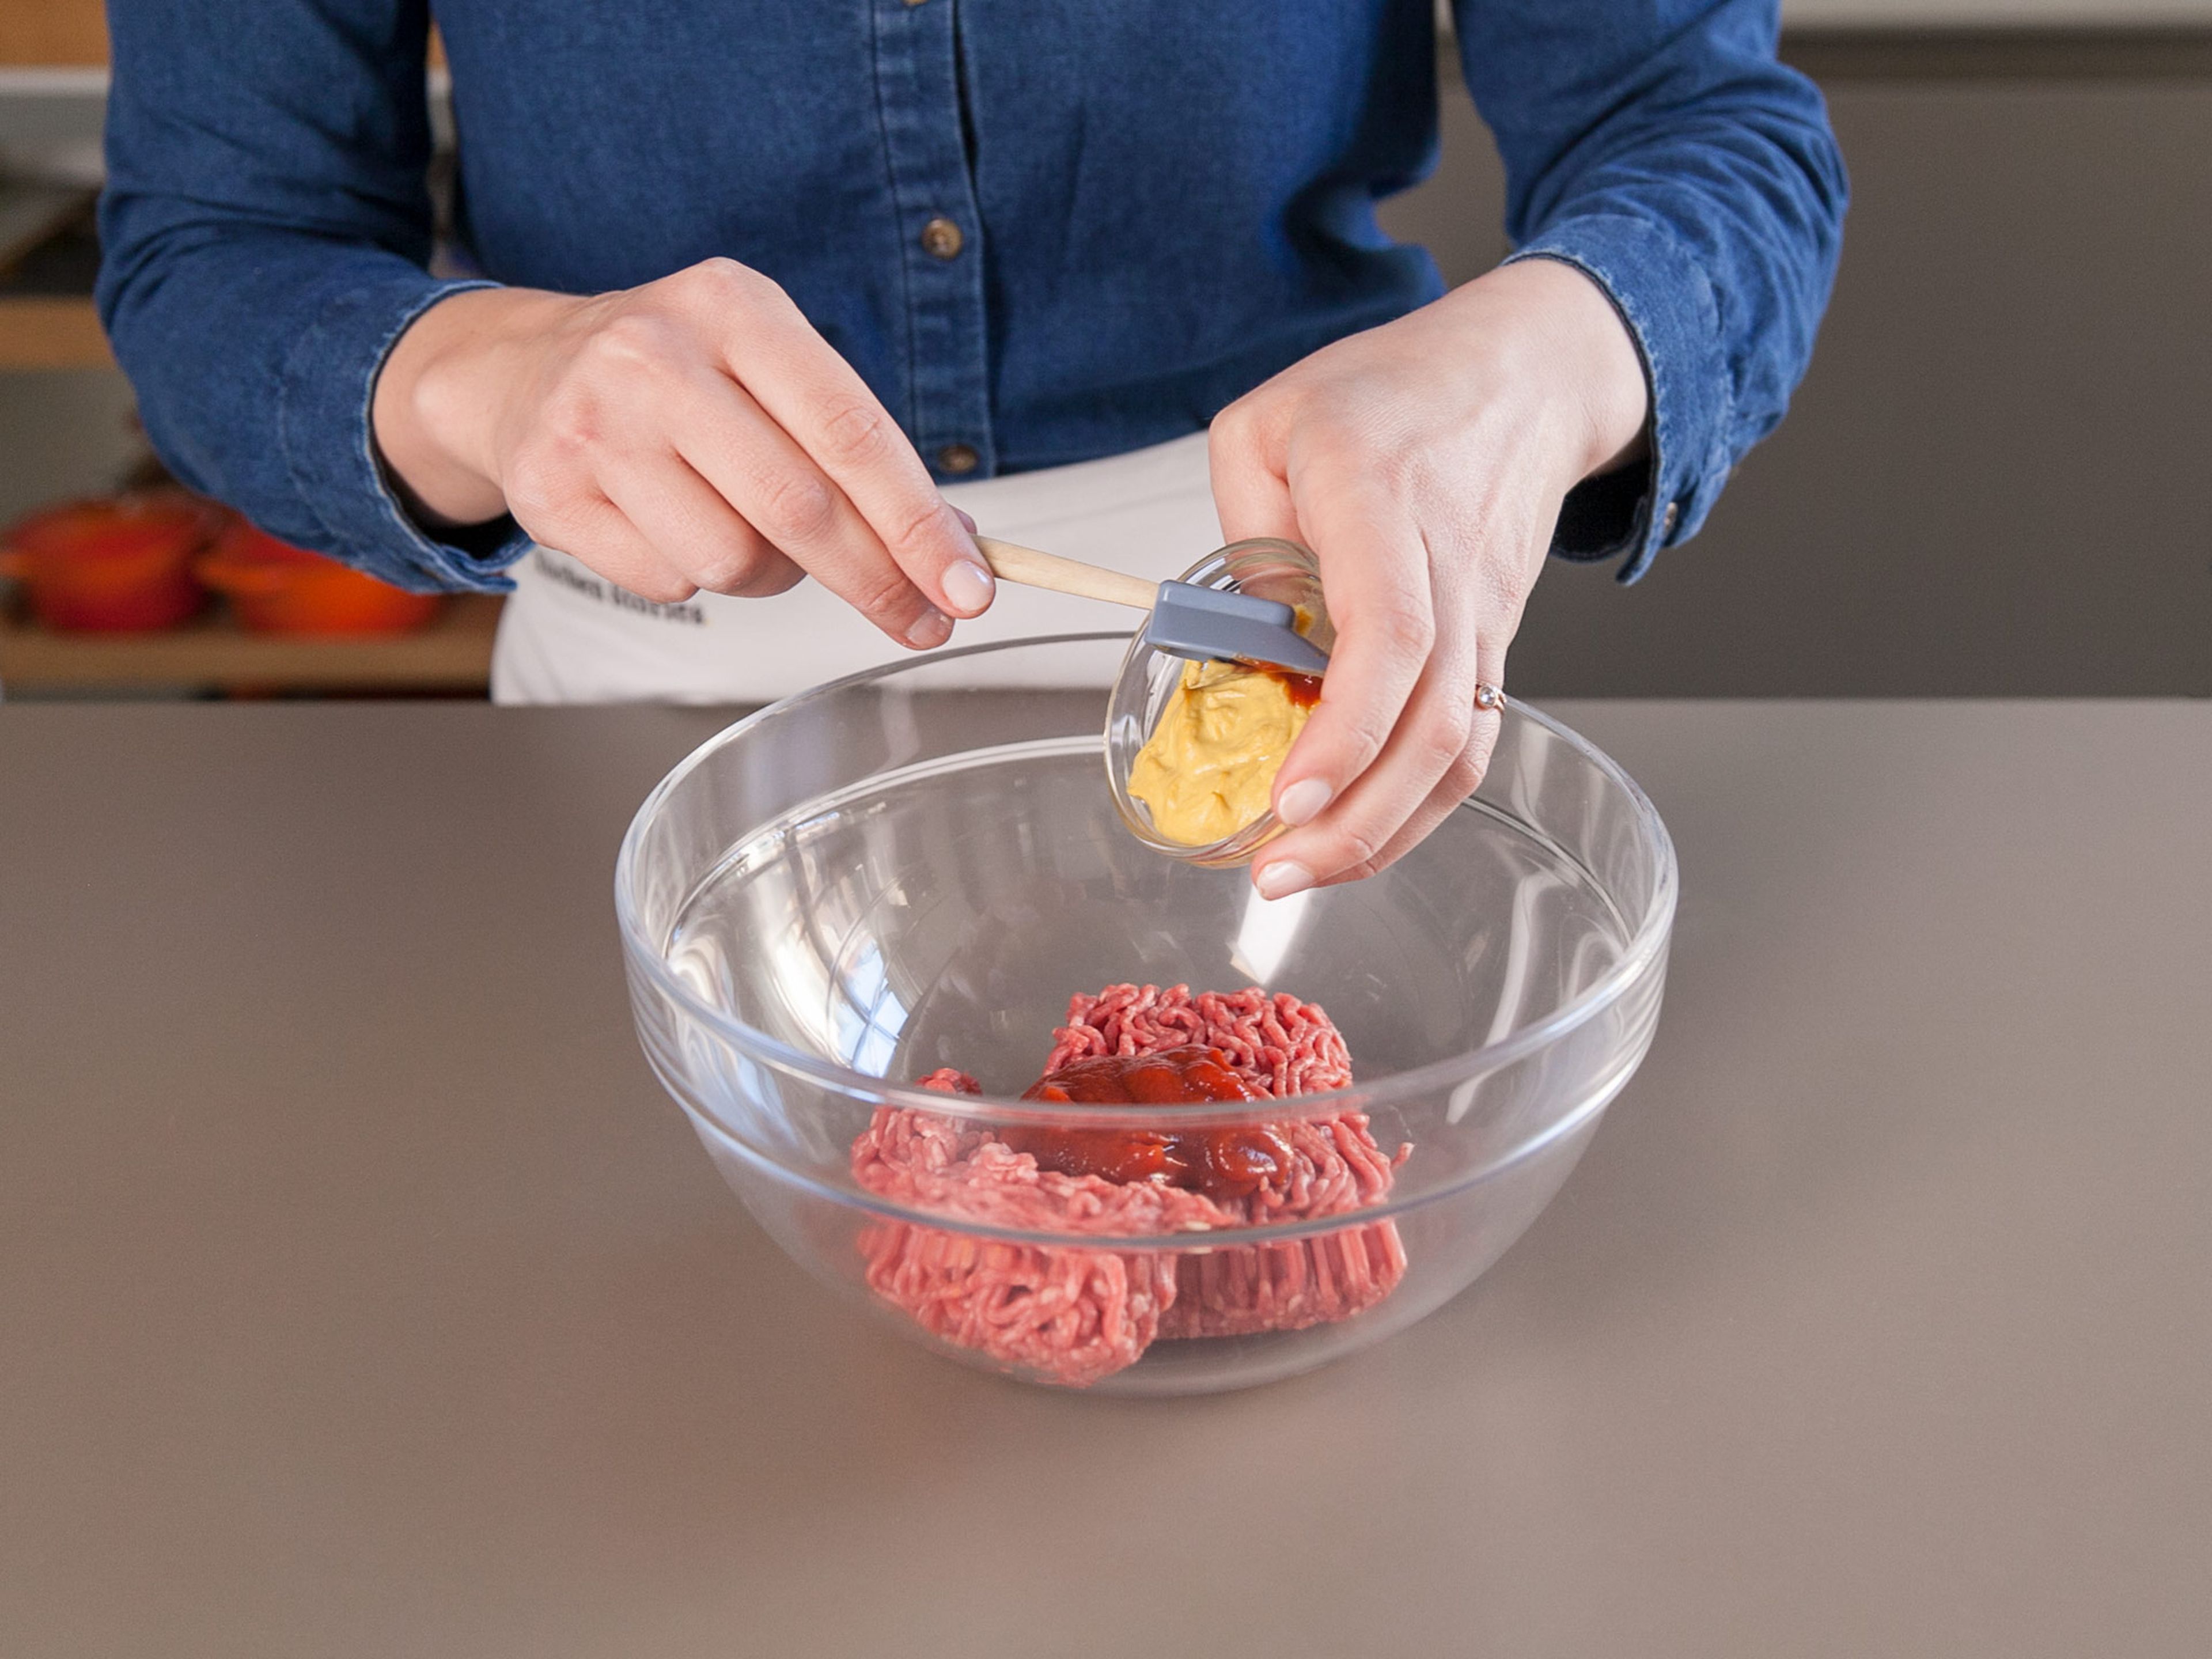 Add ground beef, Dijon mustard, and ketchup to a mixing bowl. Season with salt and pepper and mix together until combined. Divide in half and form two burger patties with your hands.